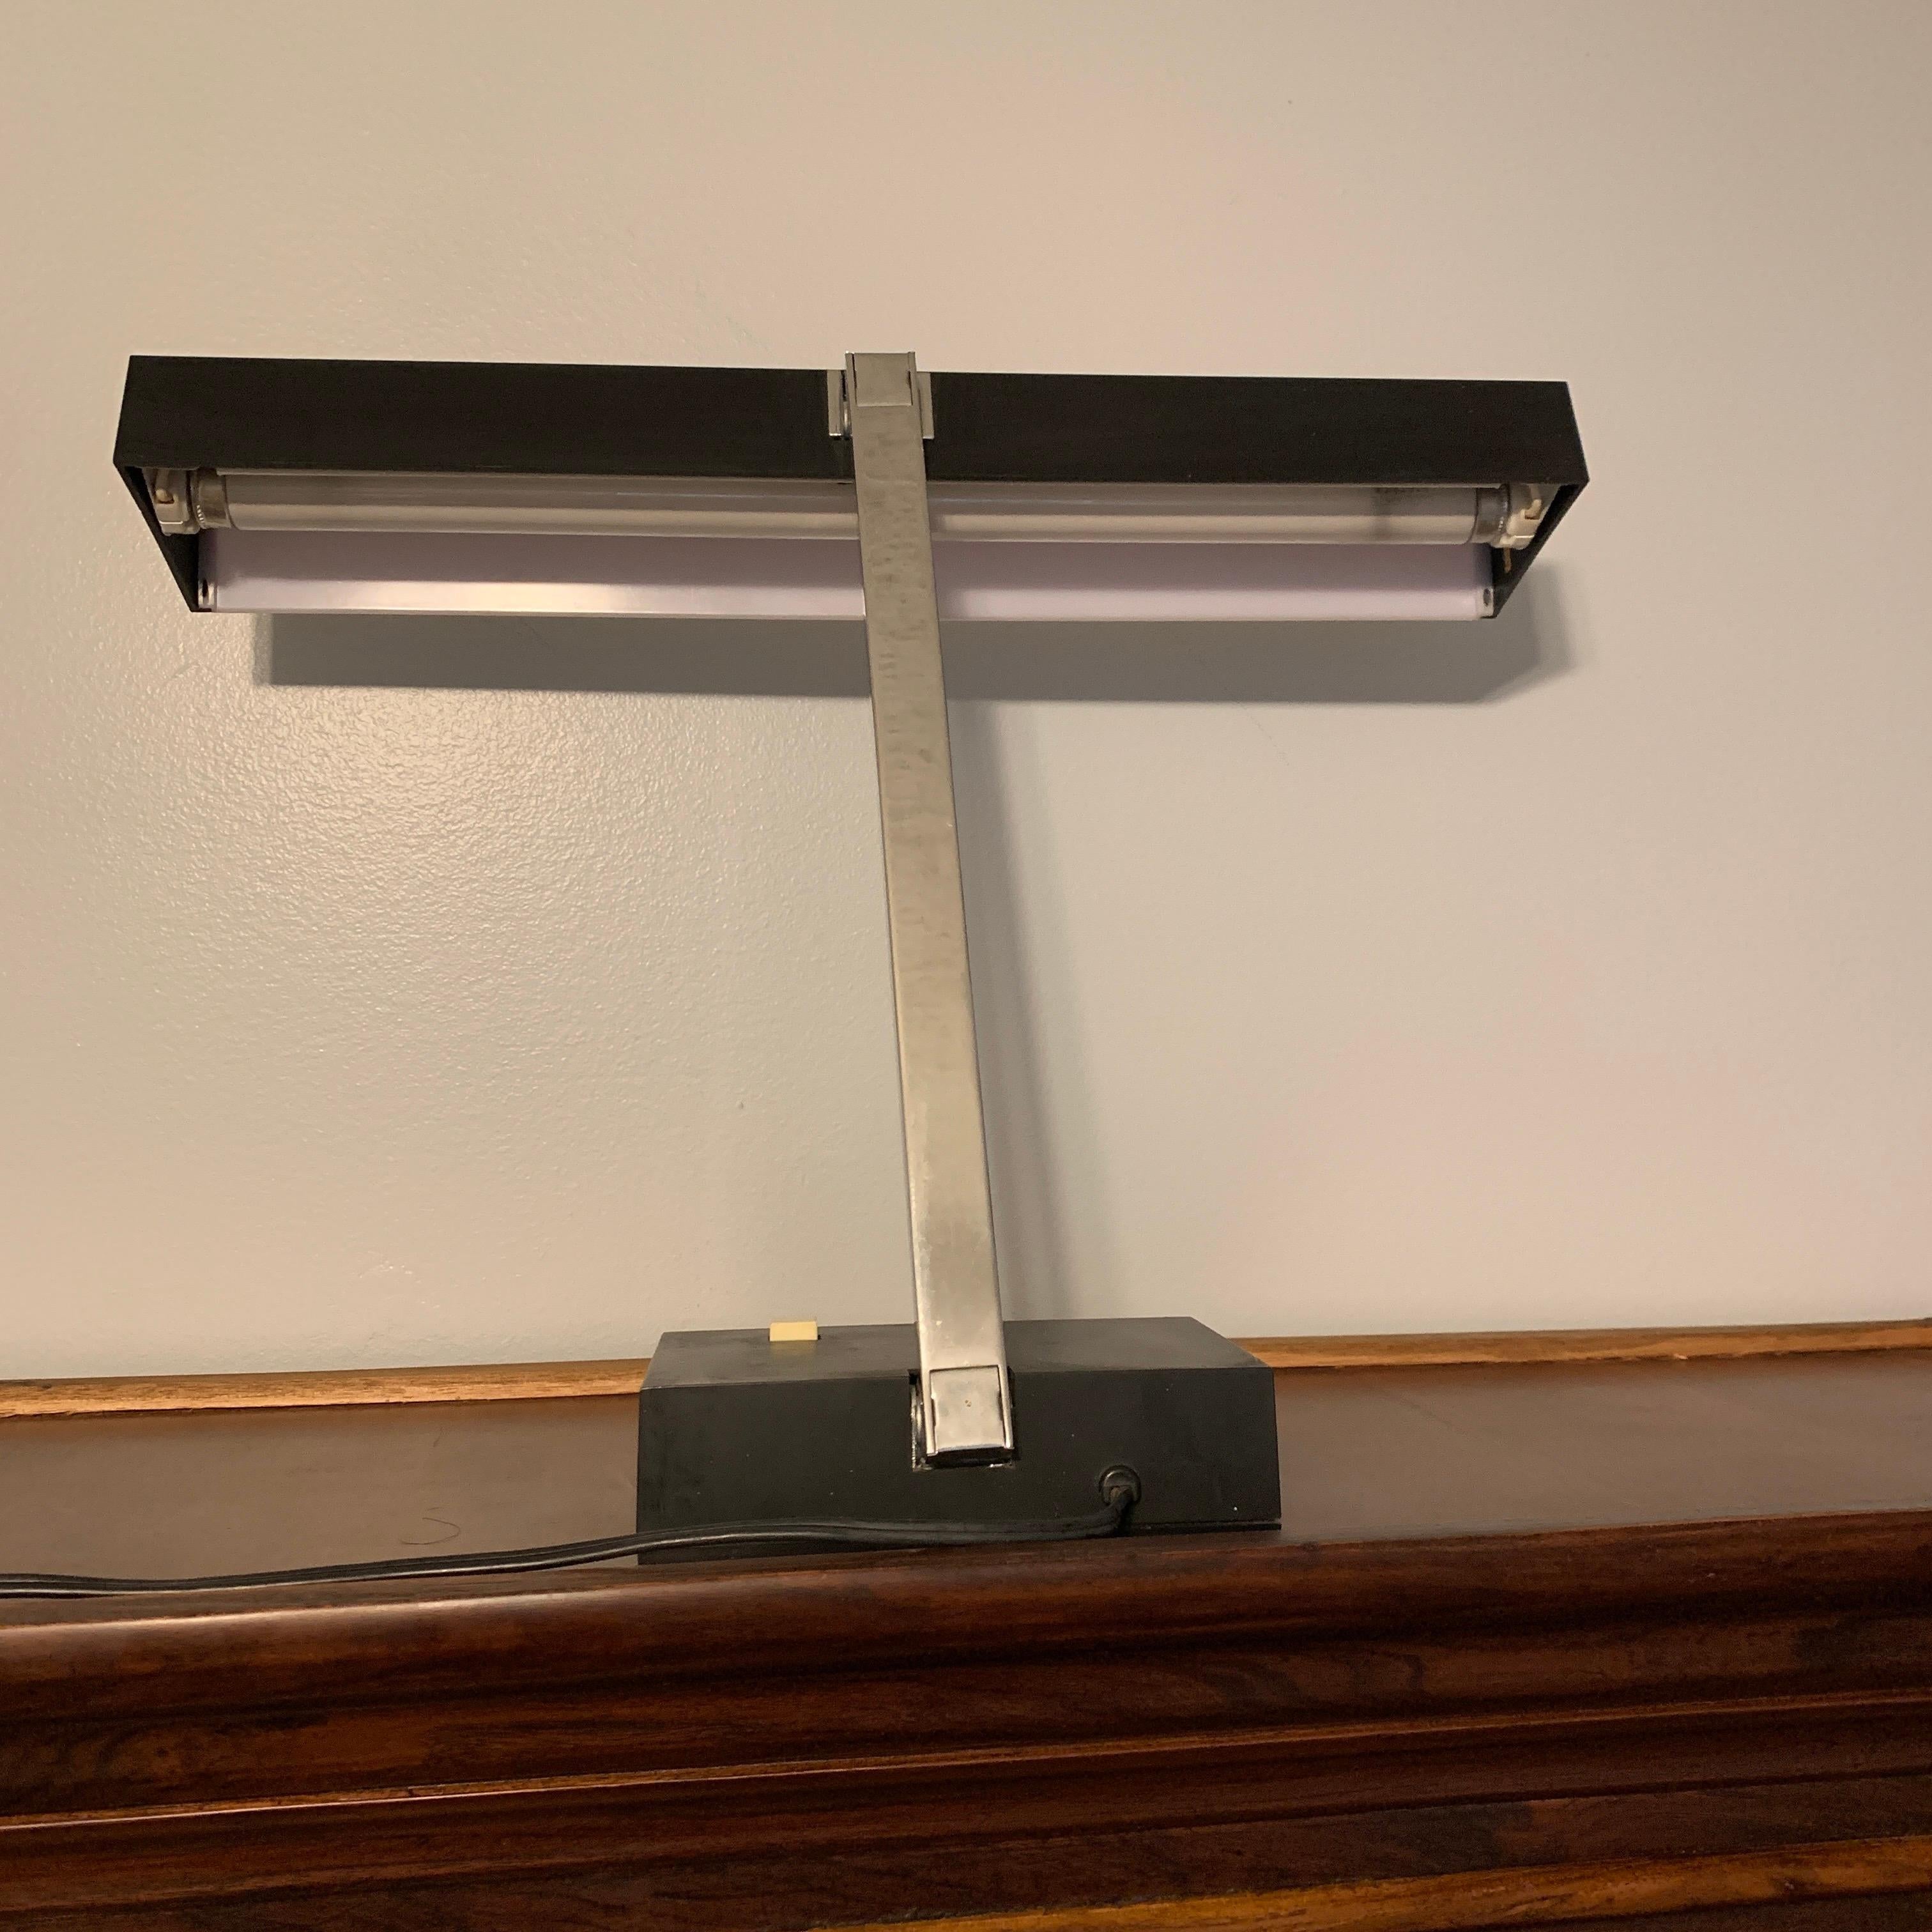 Super cool vintage Lightolier desk lamp. It’s perfect for the mid-century modern office! Sleek design and clean lines. Made from hard plastic composition mostly aside from the neck and parts of the base. Some light, superficial scratches, not